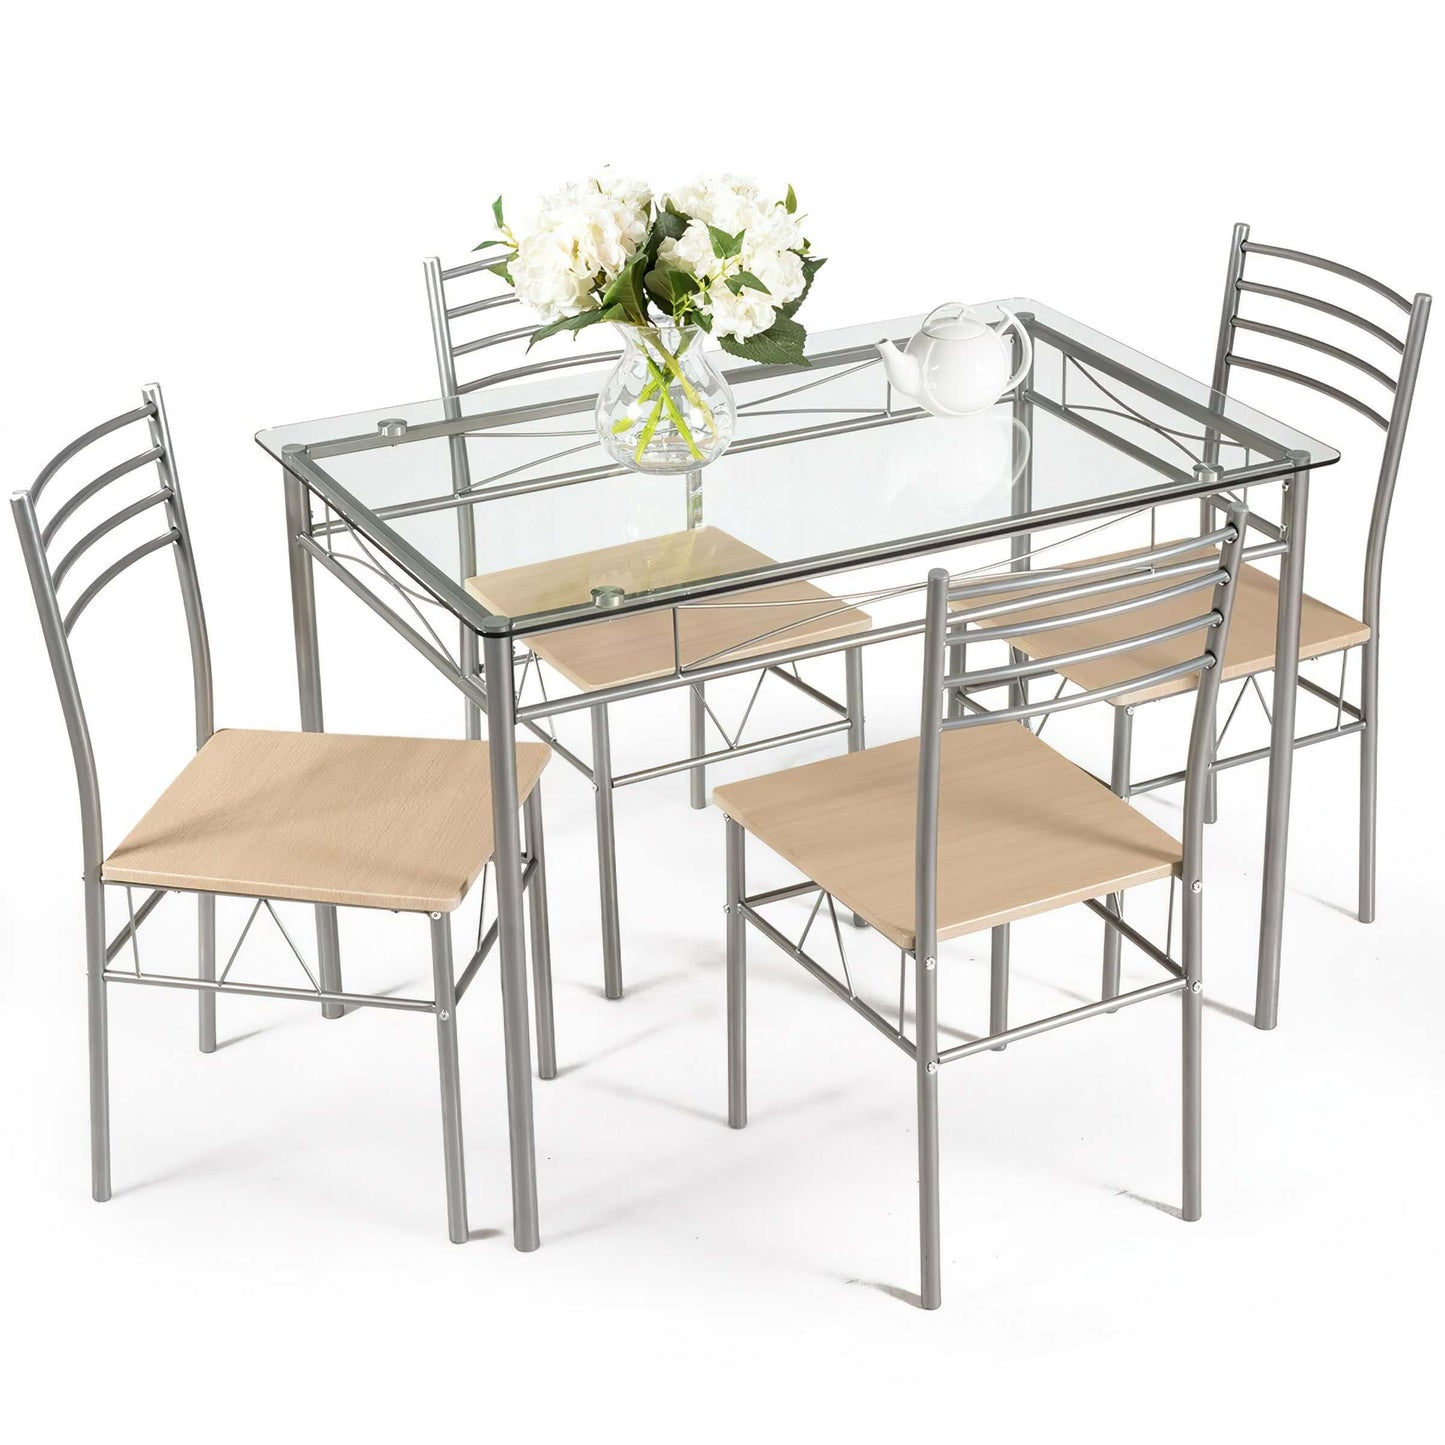 Trendy WETA 5 Piece Dining Set Table and 4 Chairs Glass Top Kitchen Breakfast Furniture